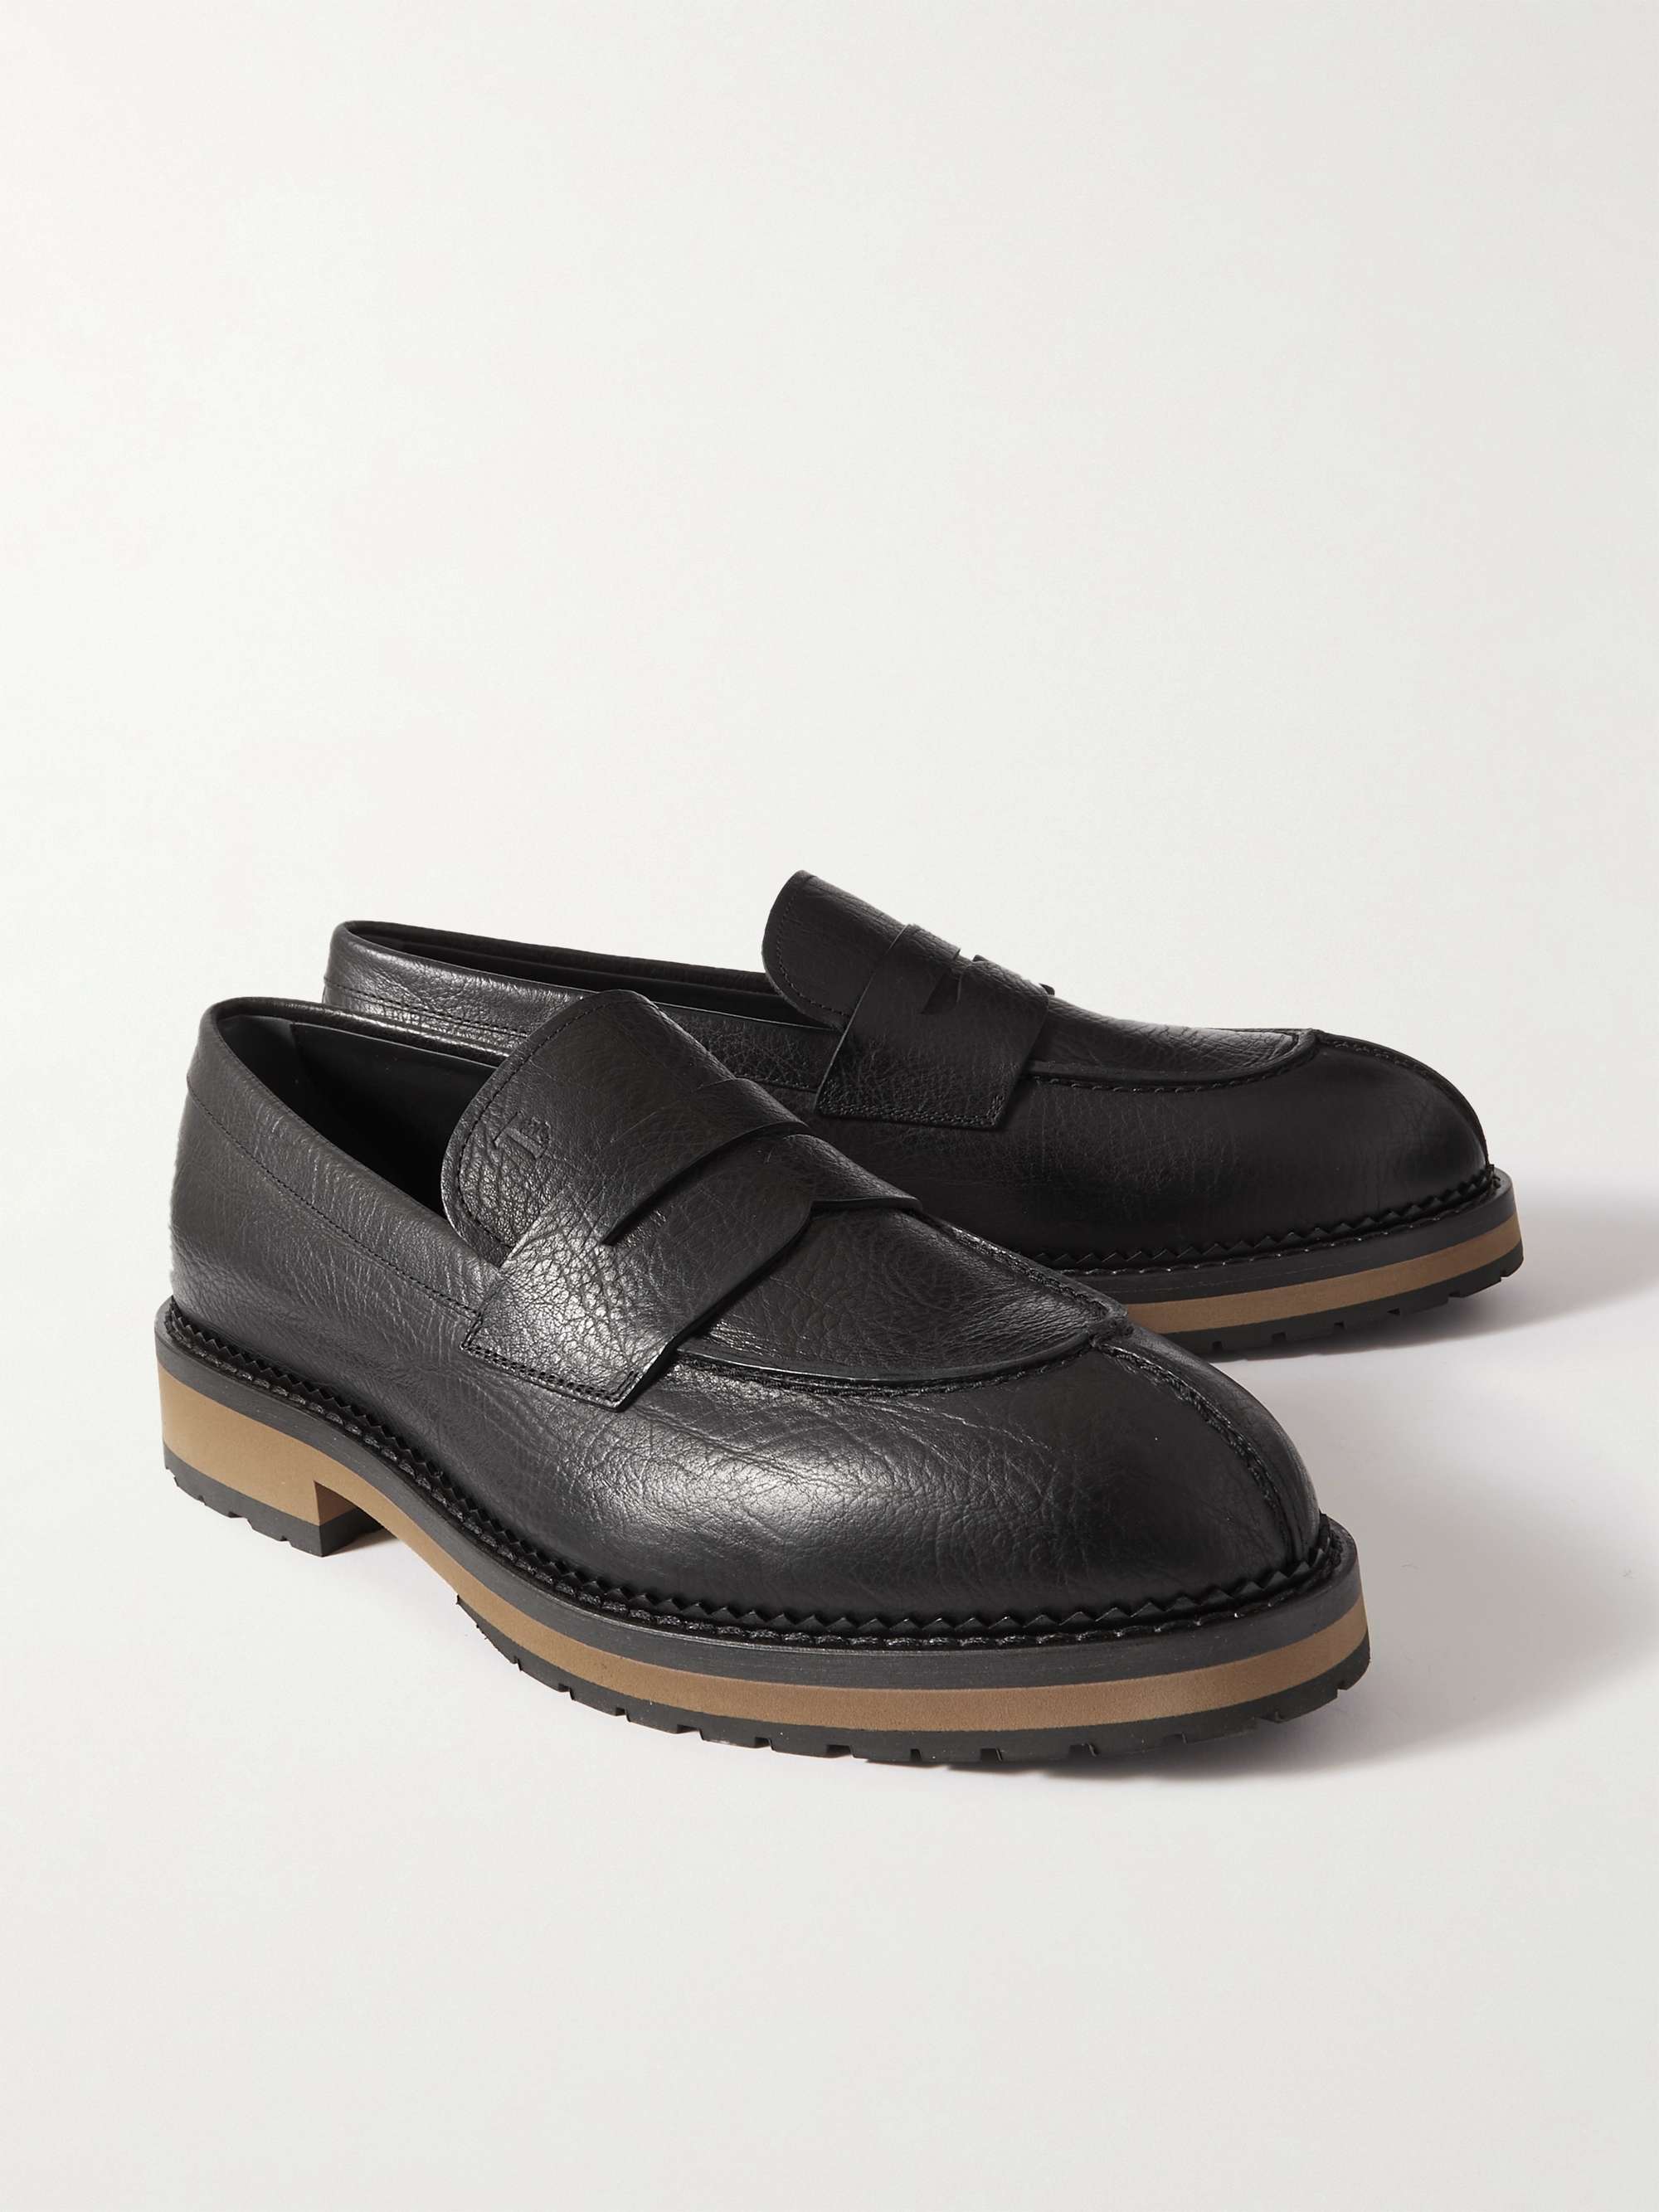 TOD'S Full-Grain Leather Penny Loafers